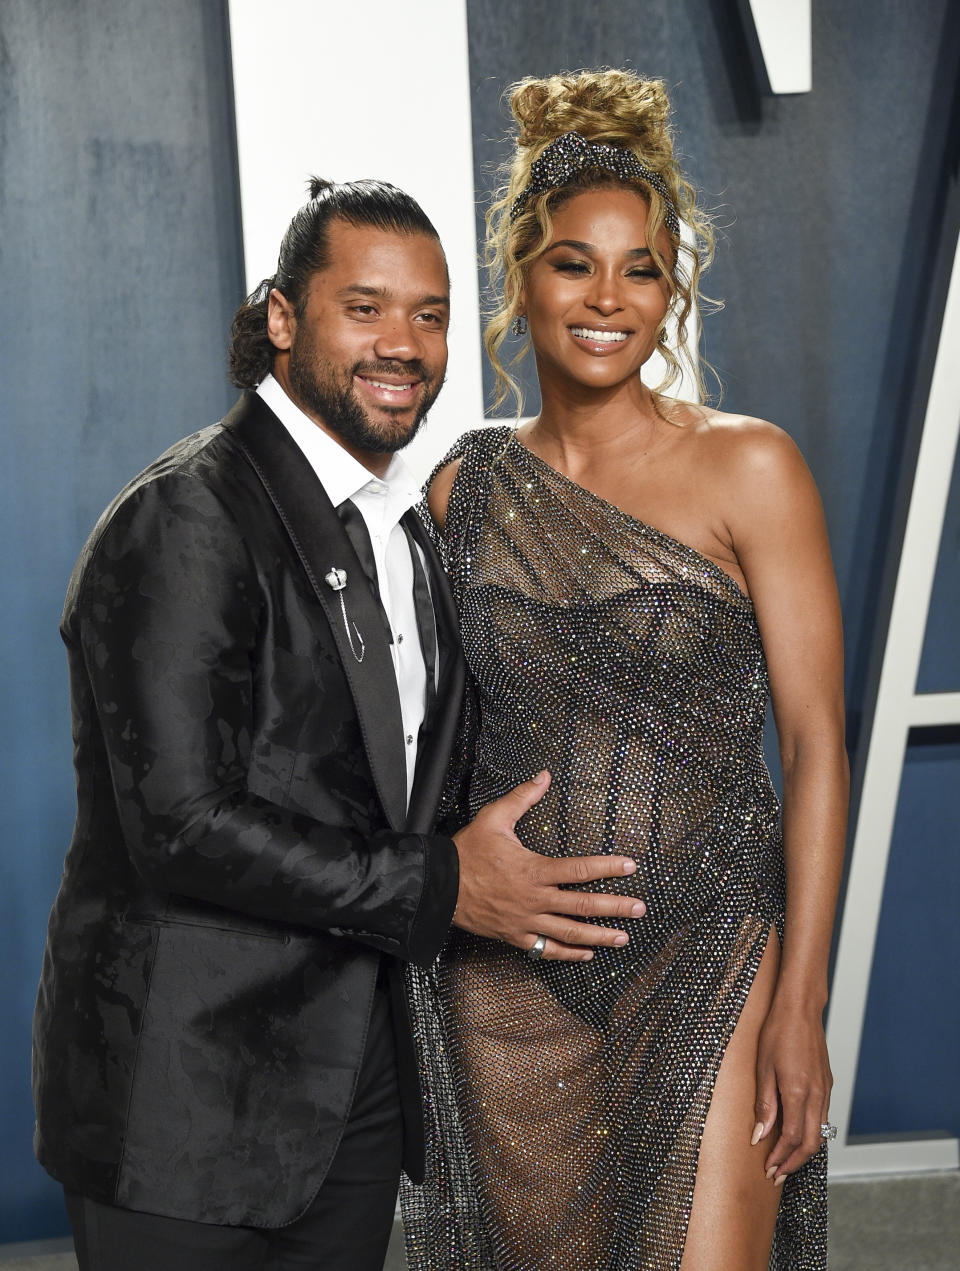 FILE - NFL quarterback Russell Wilson, left, and his pregnant wife Ciara arrive at the Vanity Fair Oscar Party in Beverly Hills, Calif. on Feb. 9, 2020. Wilson and his pop star wife Ciara are now parents to a baby boy. The couple announced Friday the birth of their son named Win Harrison Wilson on Instagram. (Photo by Evan Agostini/Invision/AP, File)